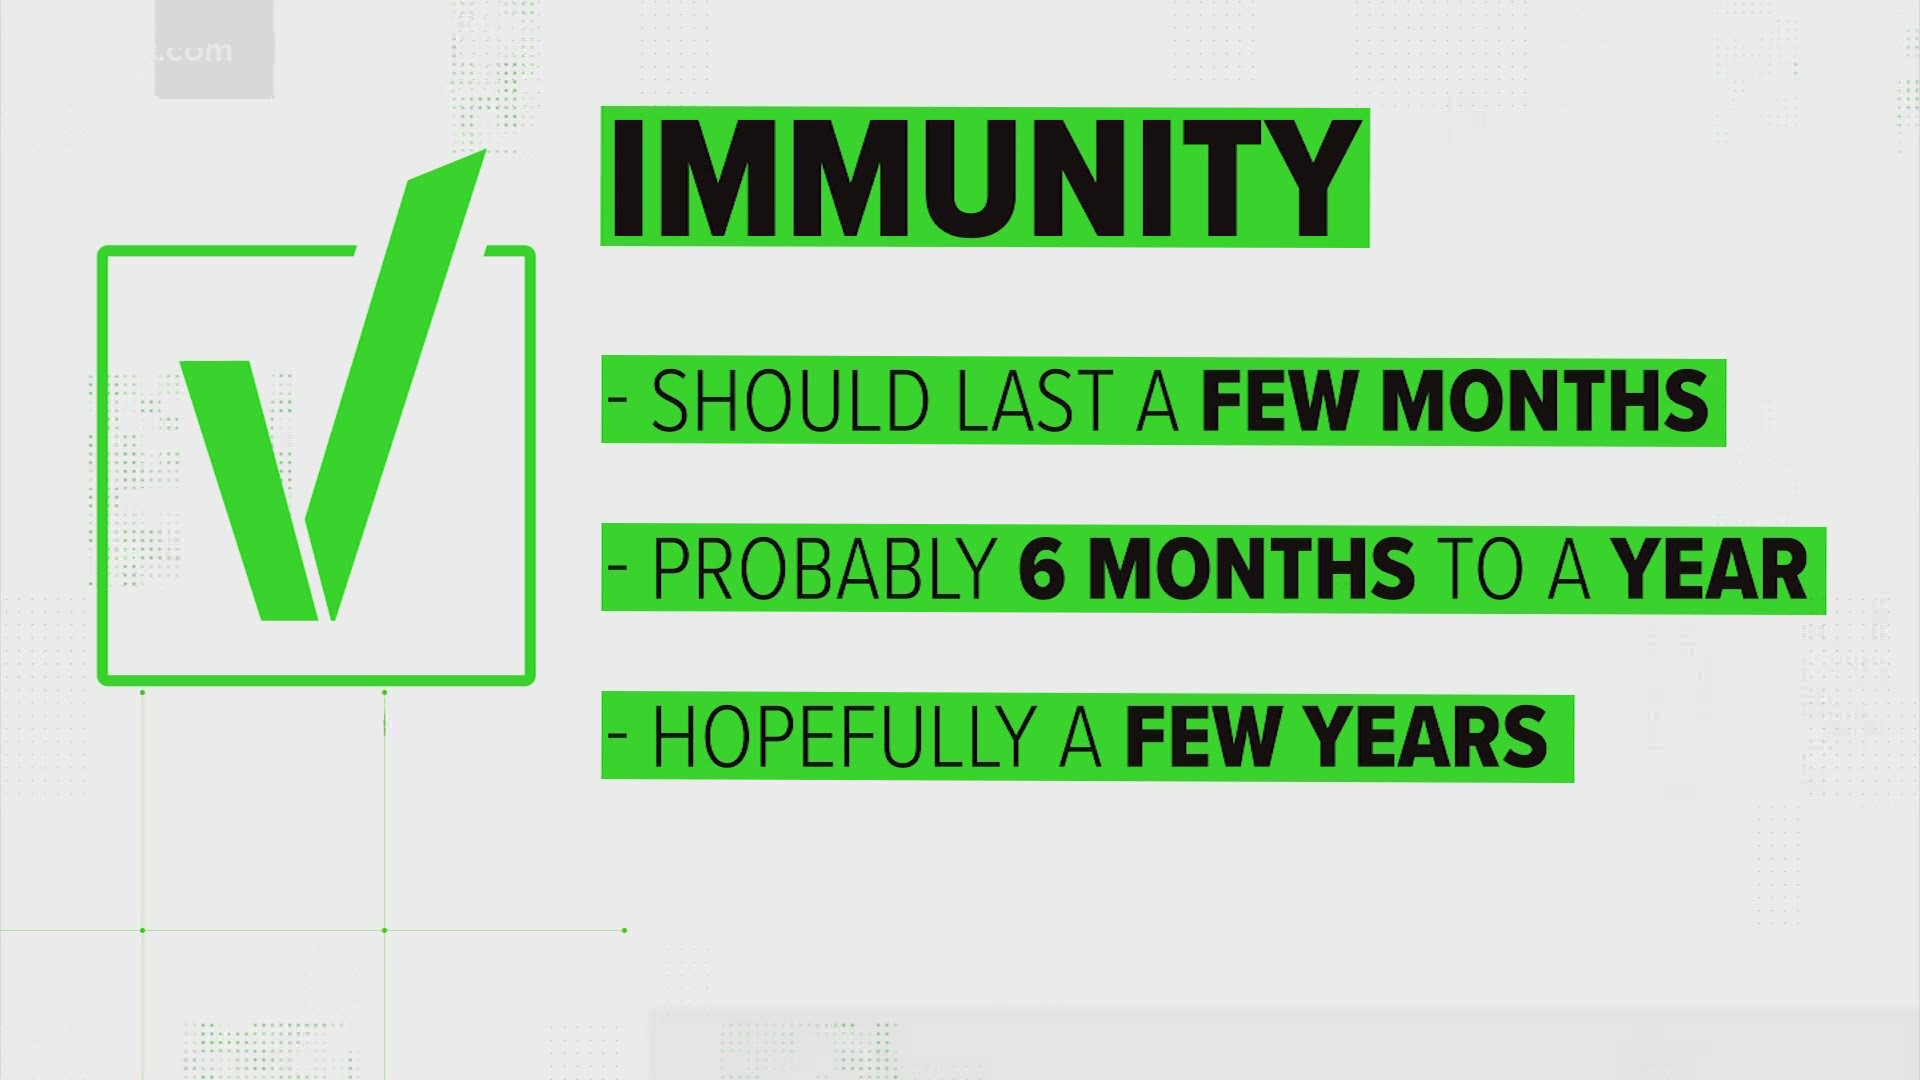 There are still a lot of questions still surround the COVID-19 vaccine. One of the most common: How long will you be immune after being vaccinated?